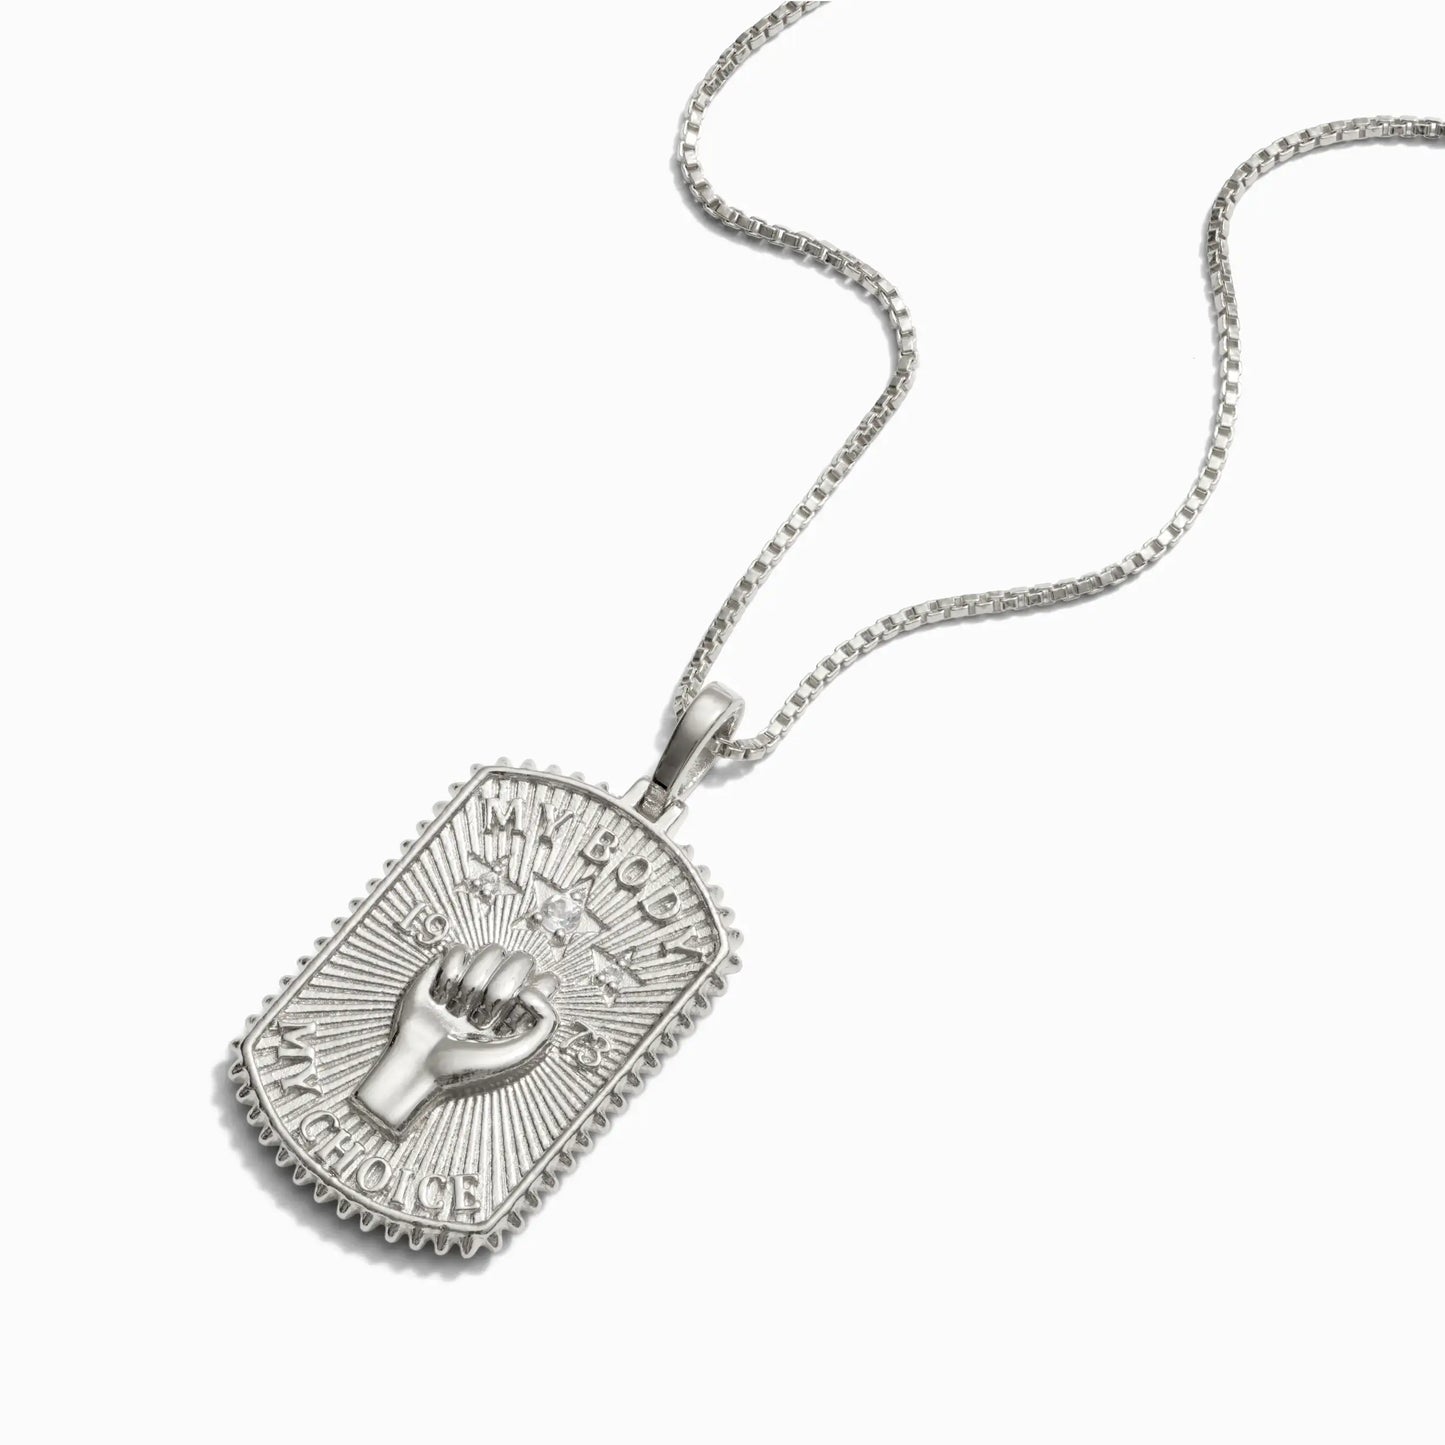 Pro Roe Dog Tag Necklace by Awe Inspired